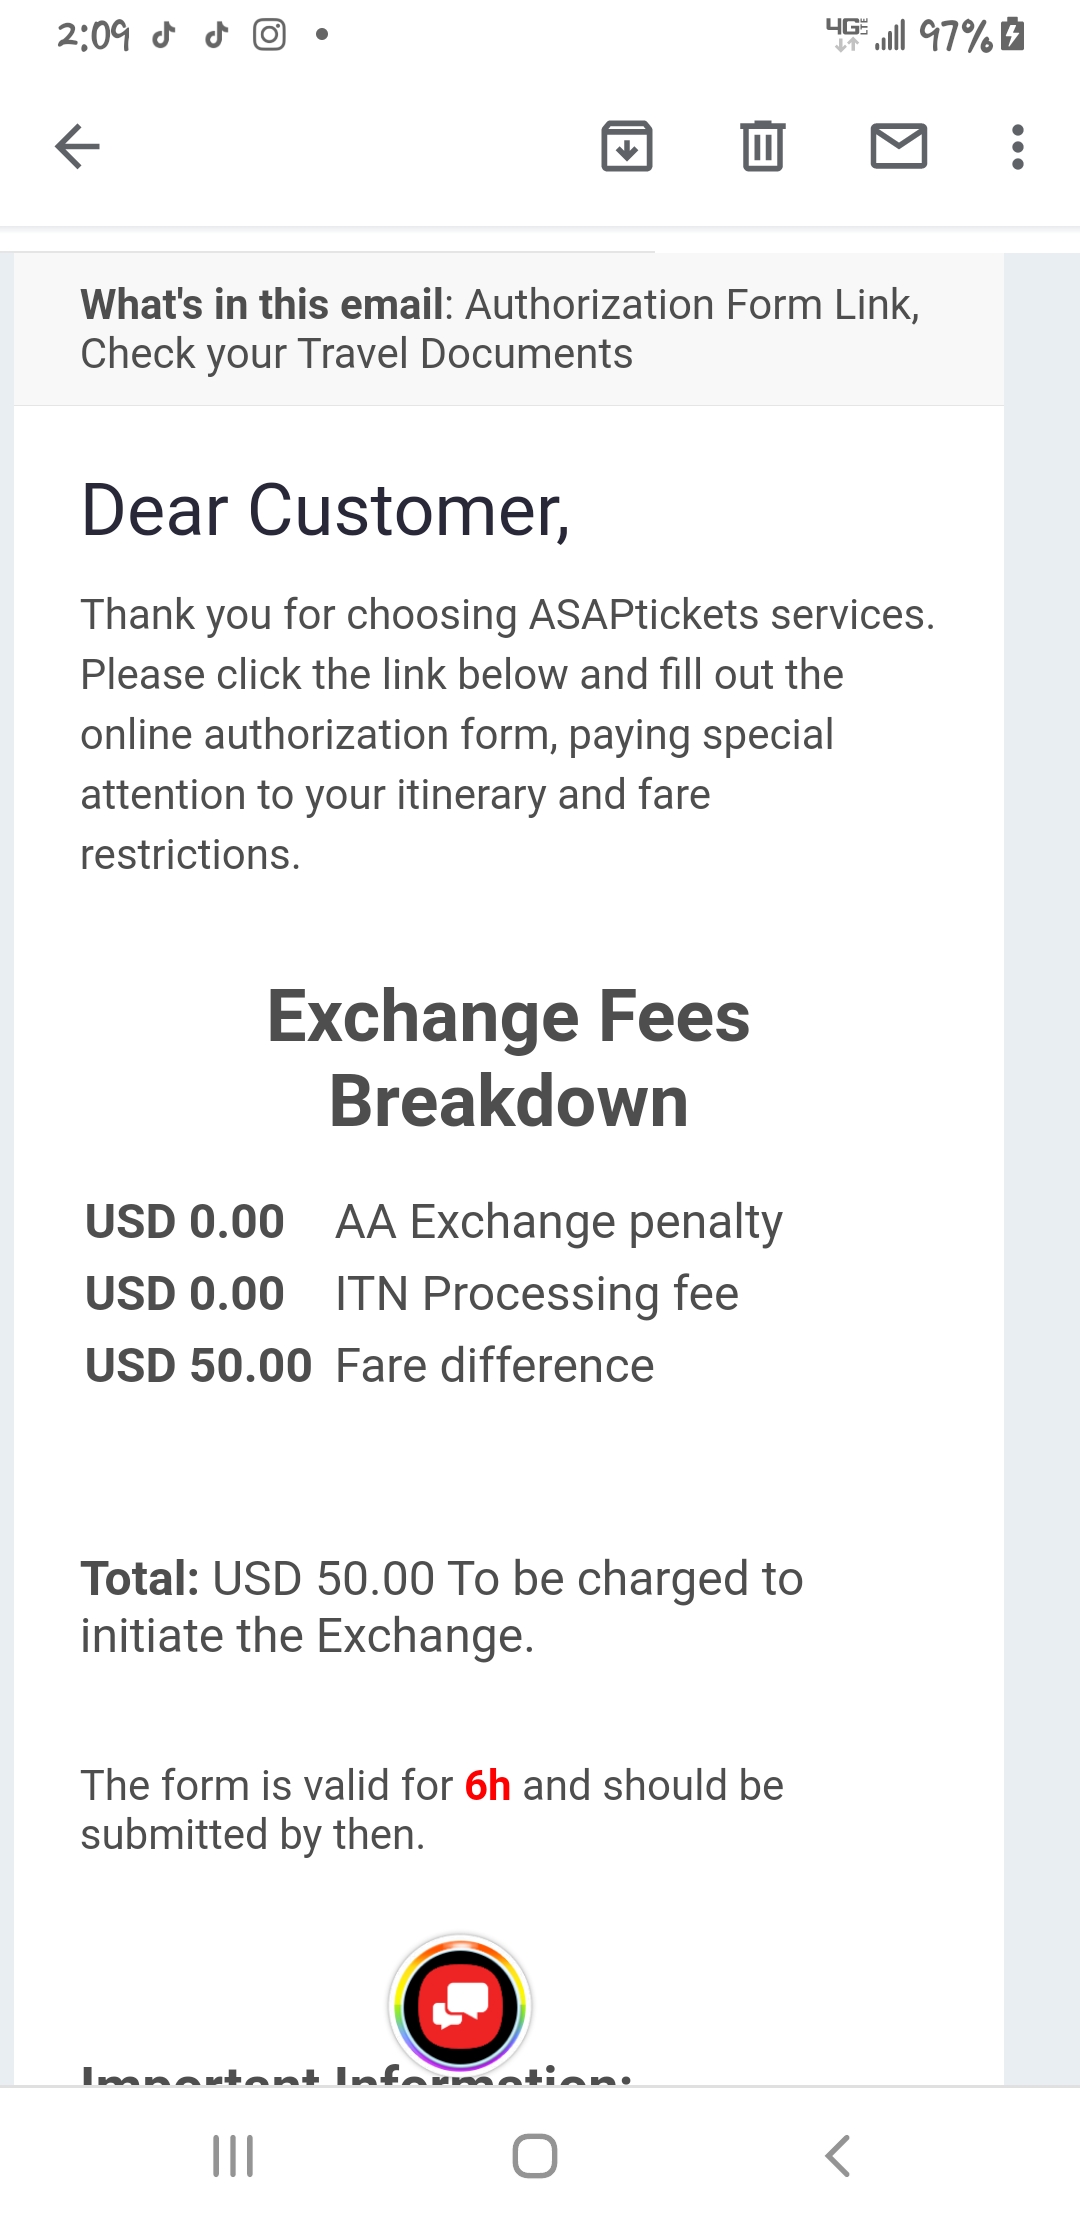 ASAP Tickets complaint My tickets been canceled an I paid full price